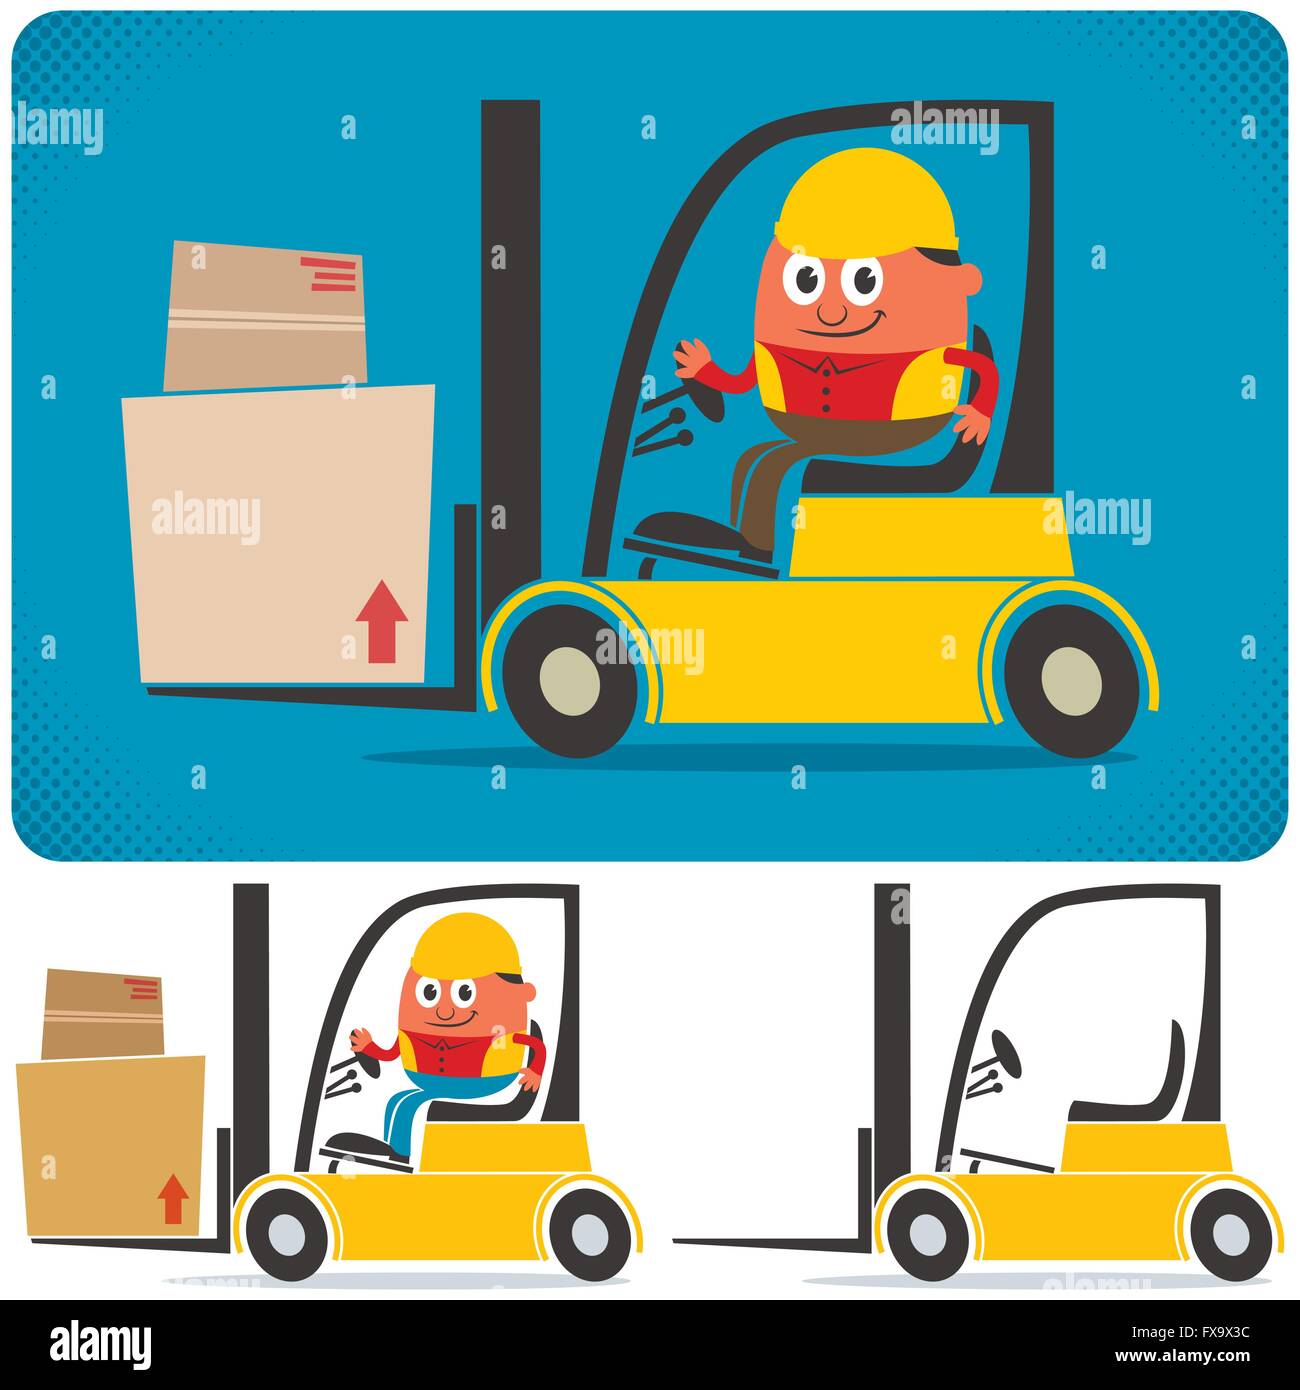 Cartoon illustration of forklift with and without driver. Stock Vector